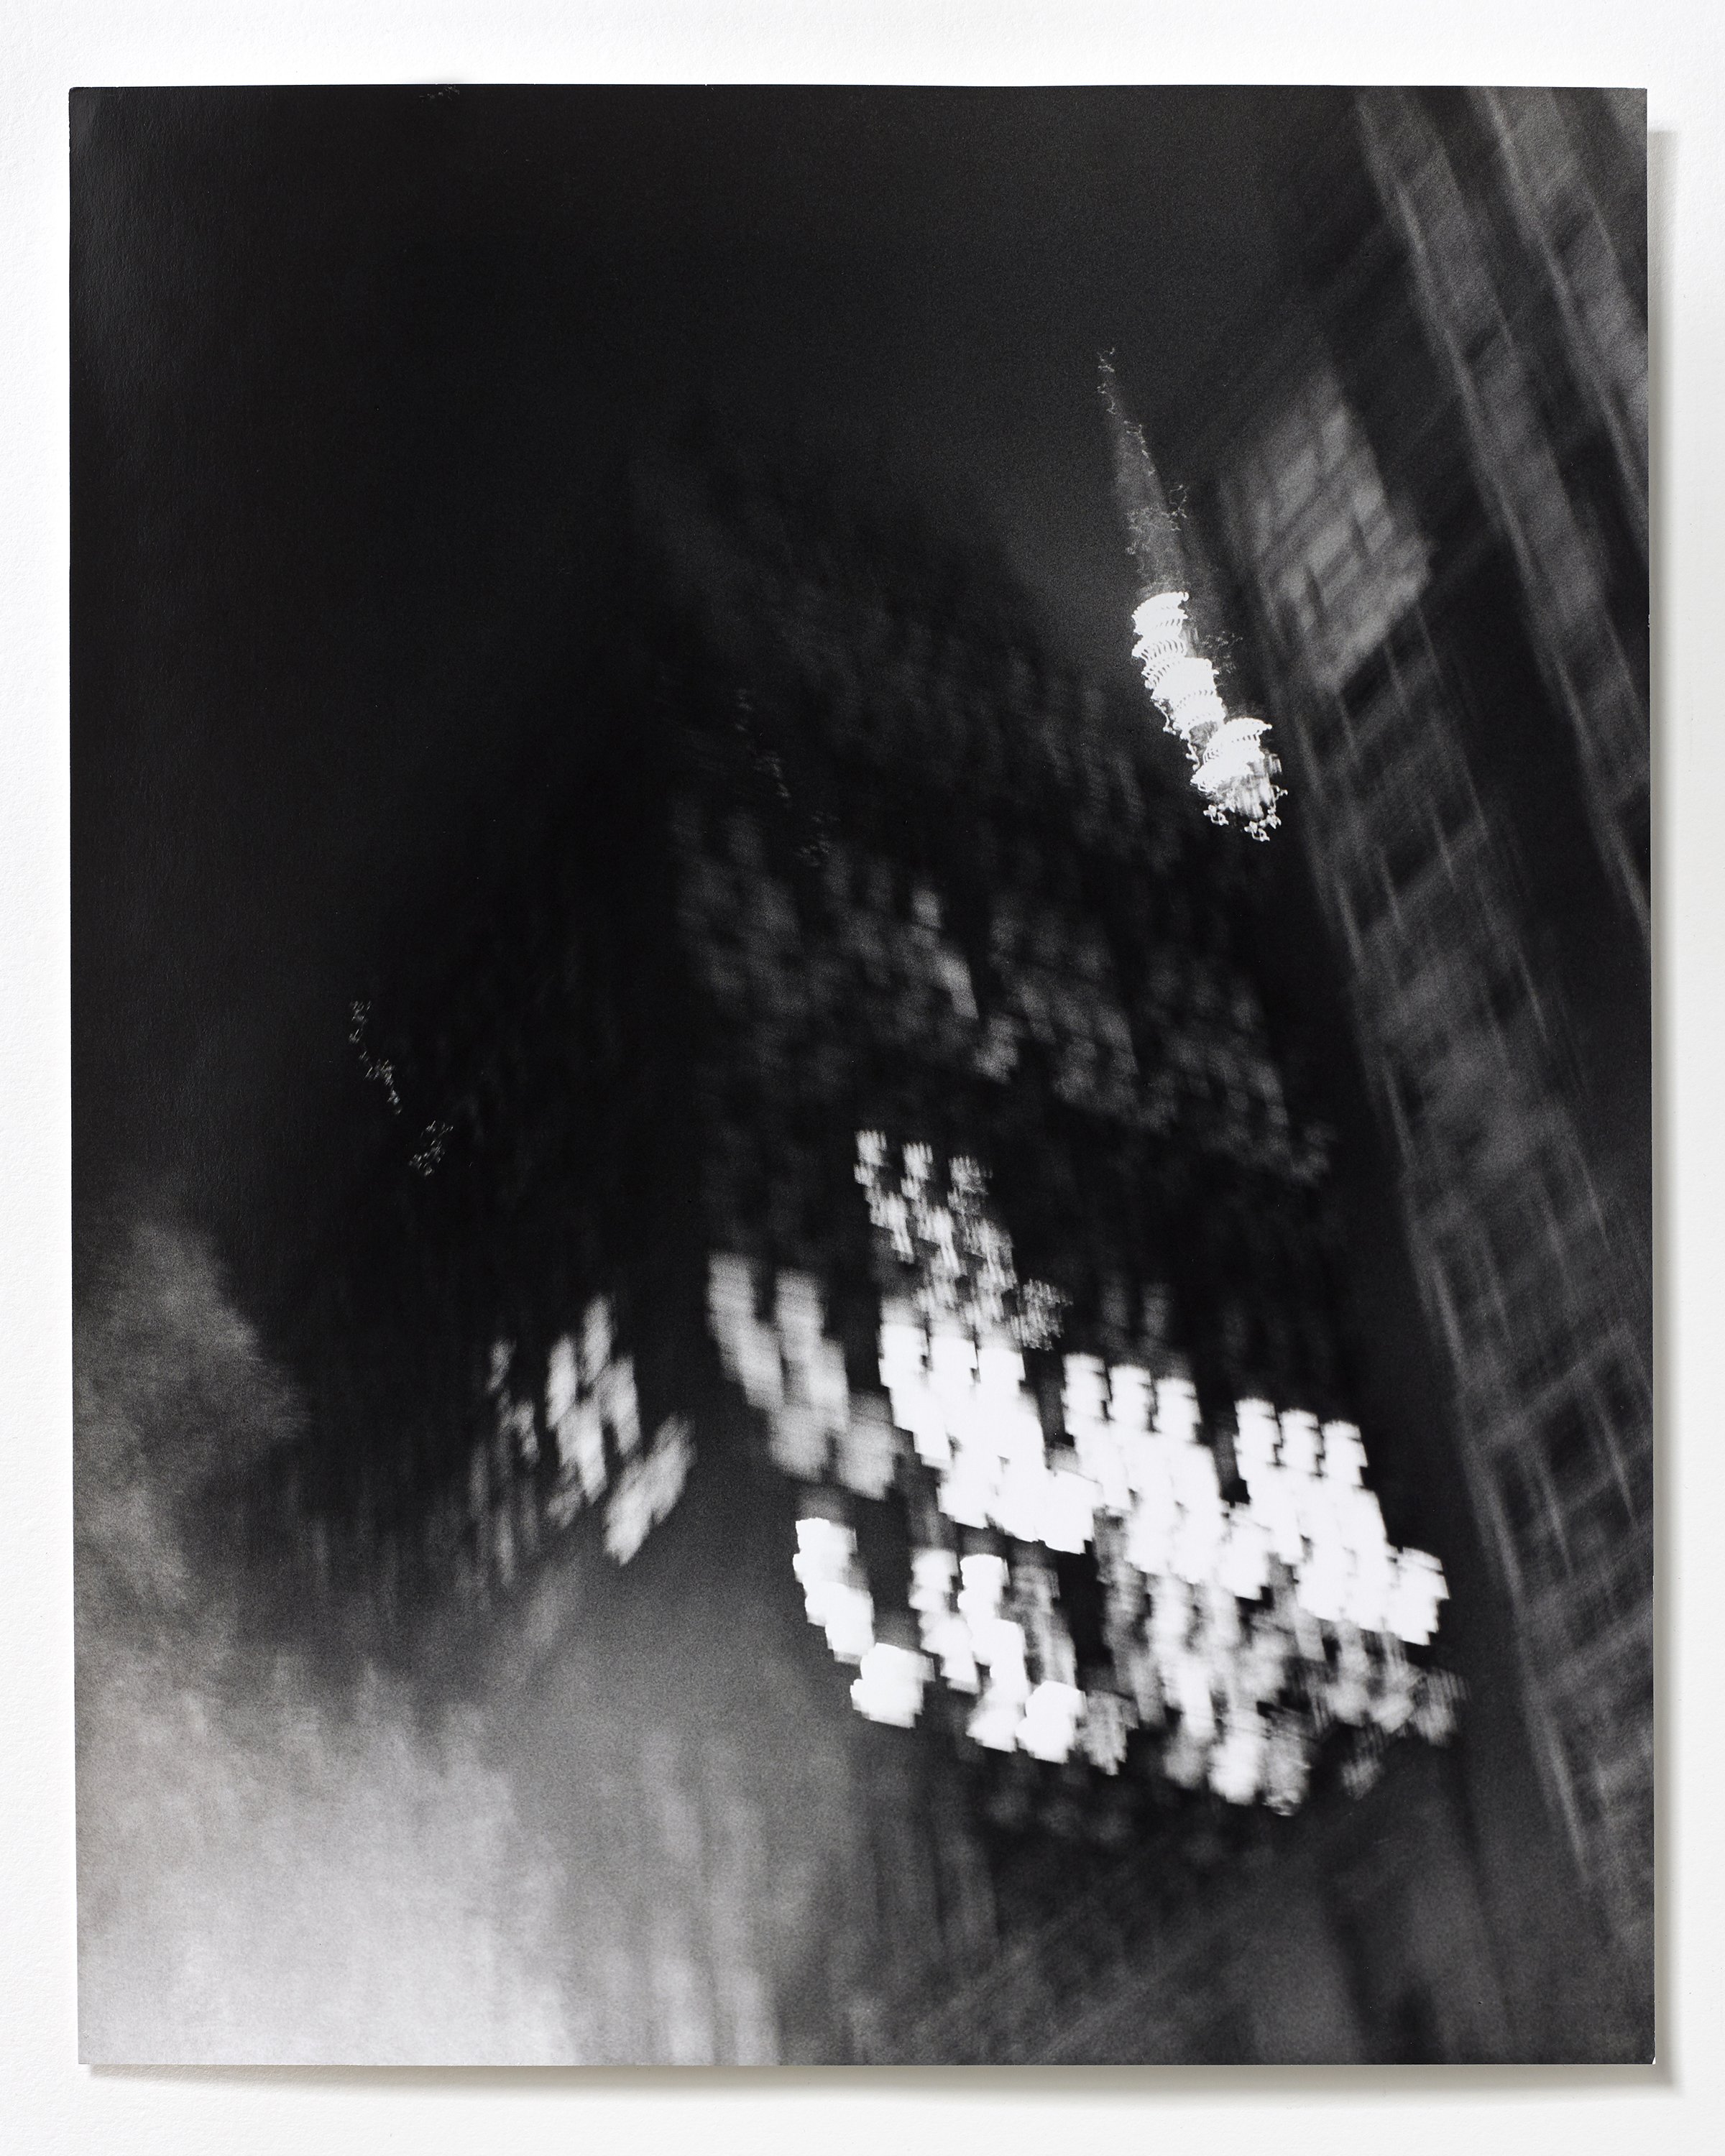 "Corner of 36th Street and Madison Avenue, facing Southwest, 10:16pm" 